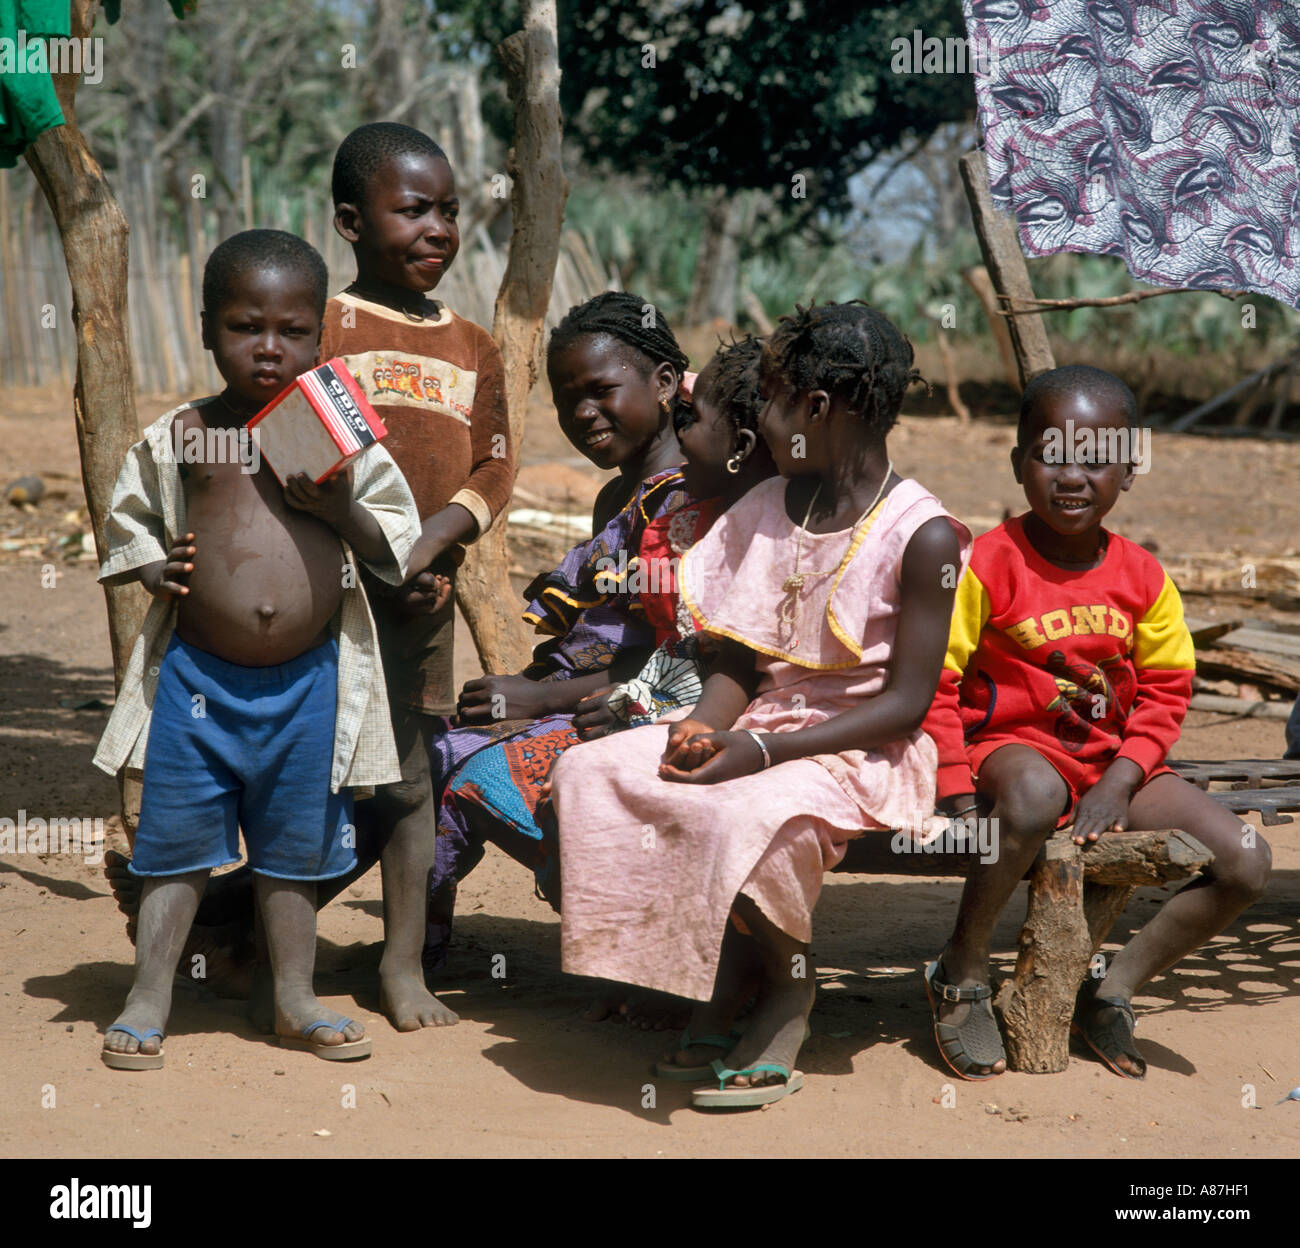 Group of young children in a local native village, The Gambia, West Africa Stock Photo